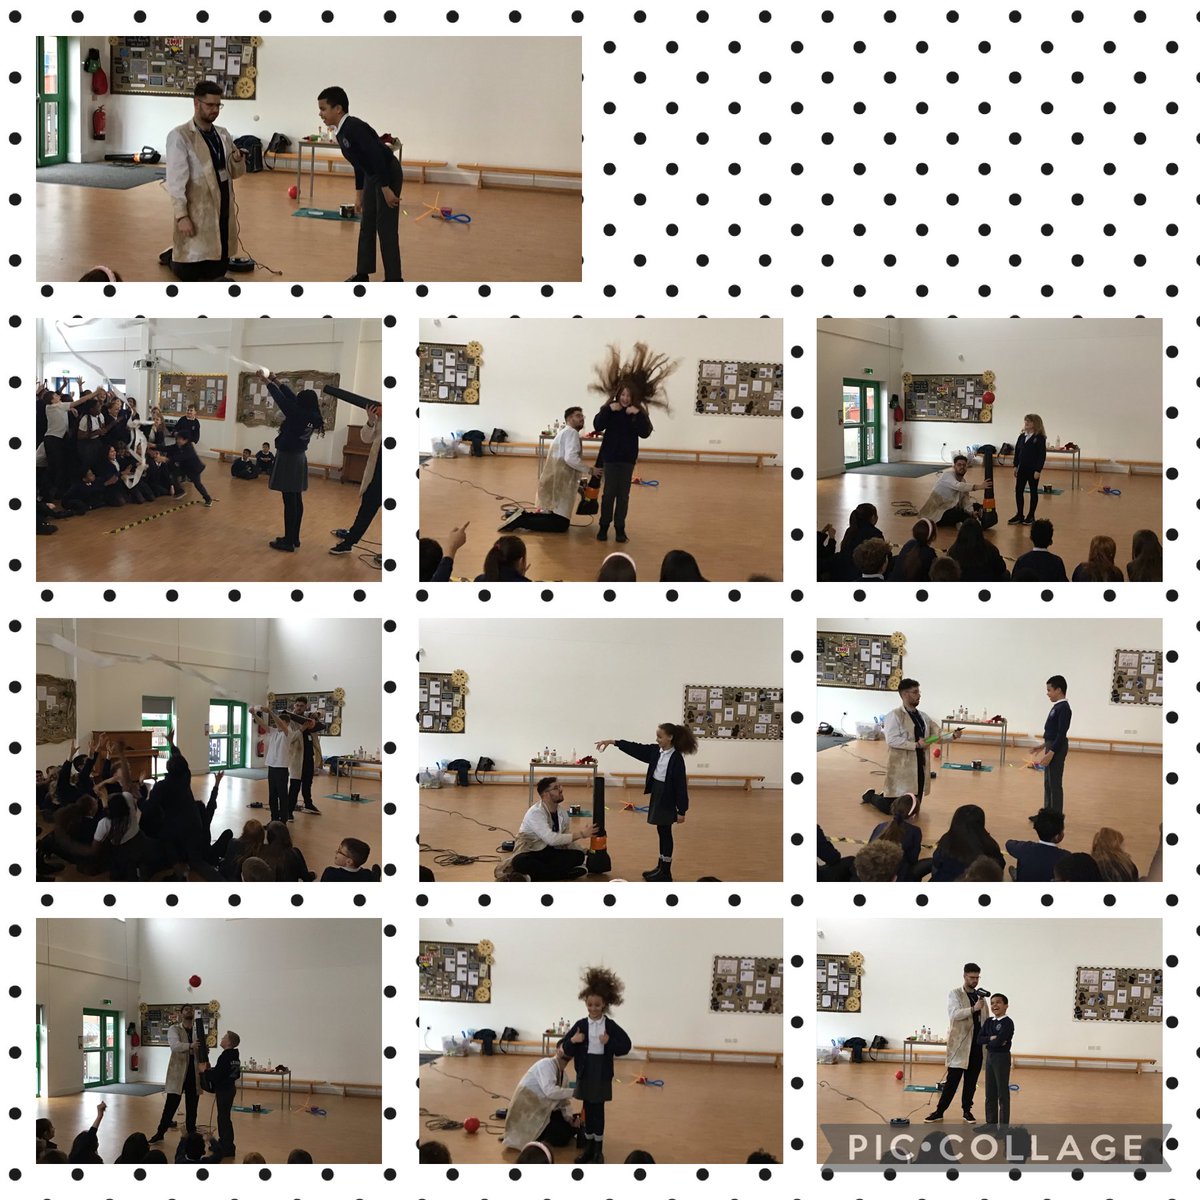 Today, as part of British Science Week, Year 5/6 took part in a ‘Silly Science’ workshop and WOW it was so much fun! The children learnt all about many areas of science involving chemical reactions, thrust, pressure, air resistance and even explosions!